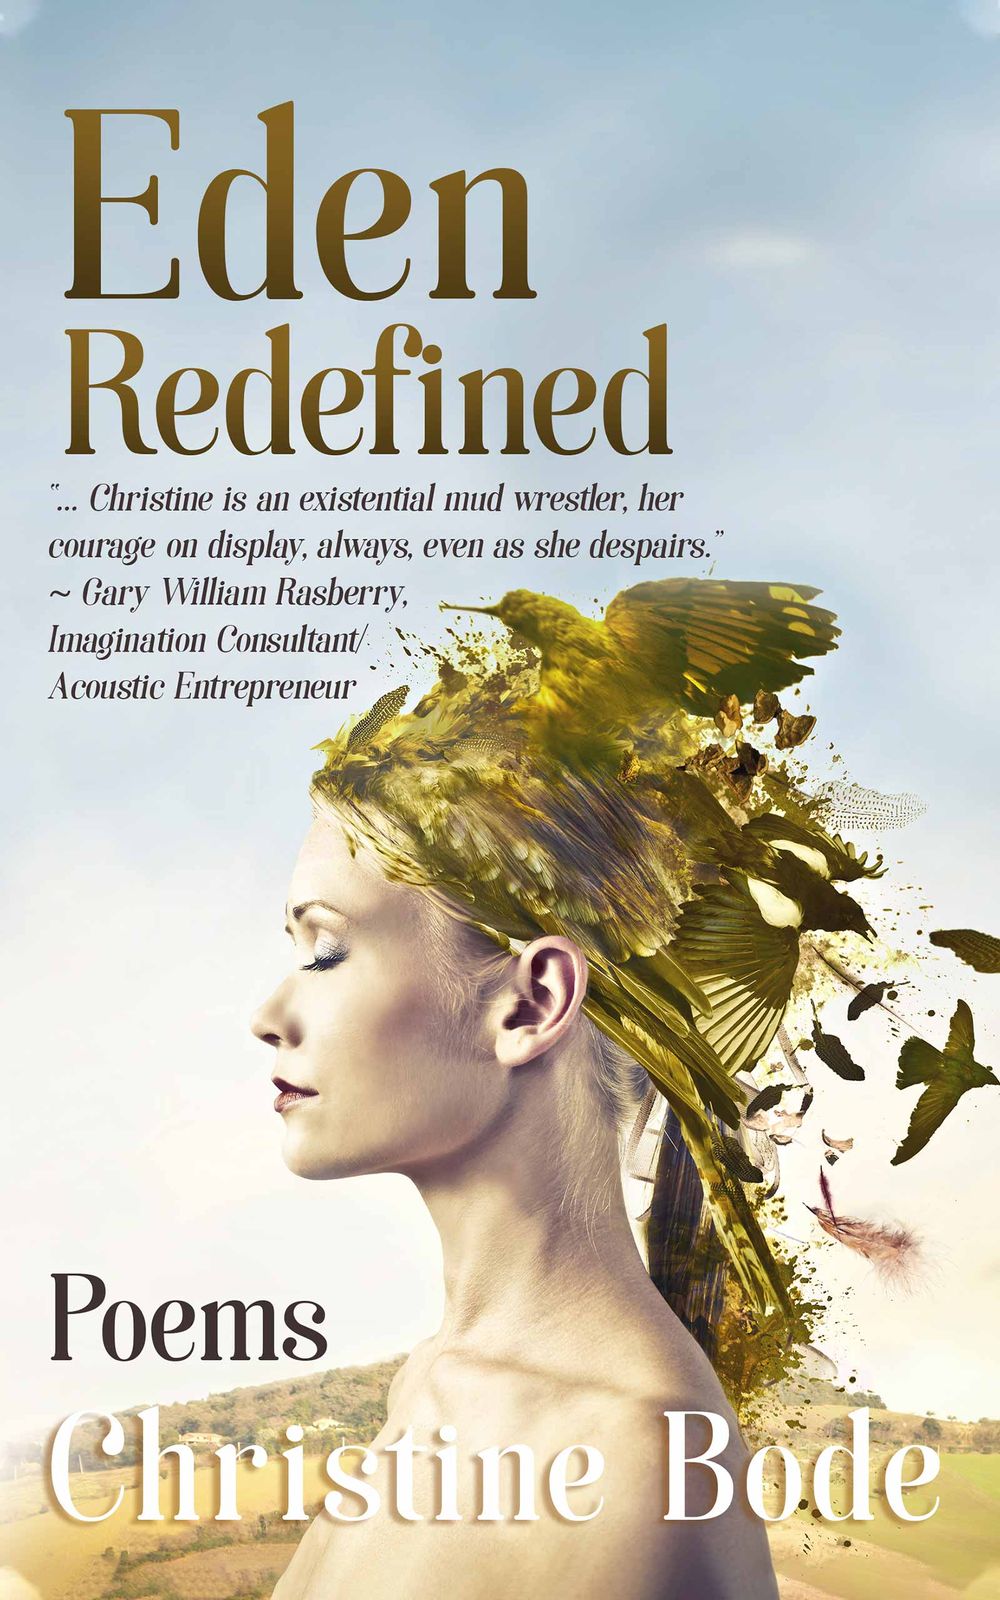 Eden Redefined, Christine Bode, poetry by Christine Bode, Canadian poetry, poetry by women, bodacious, Bodacious Copy, poetry about the human condition